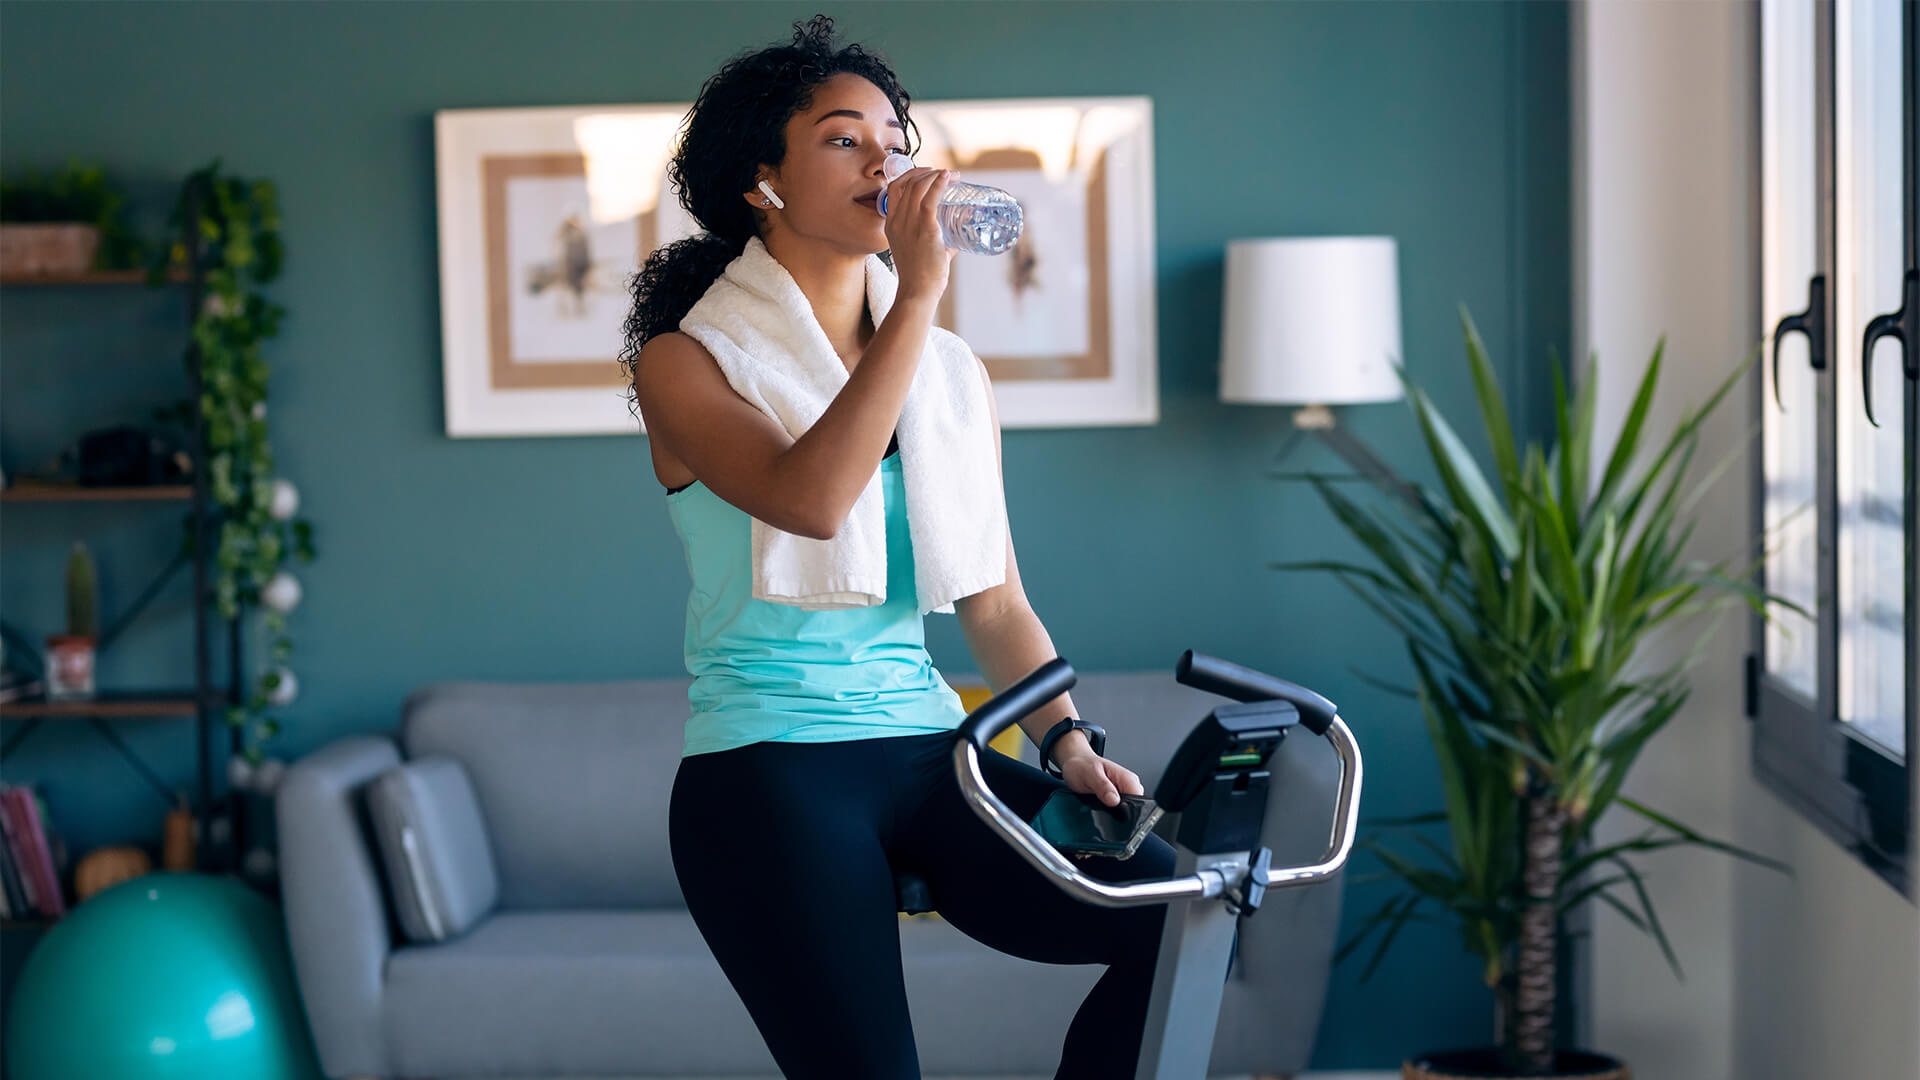 woman using an exercise bike in home gym